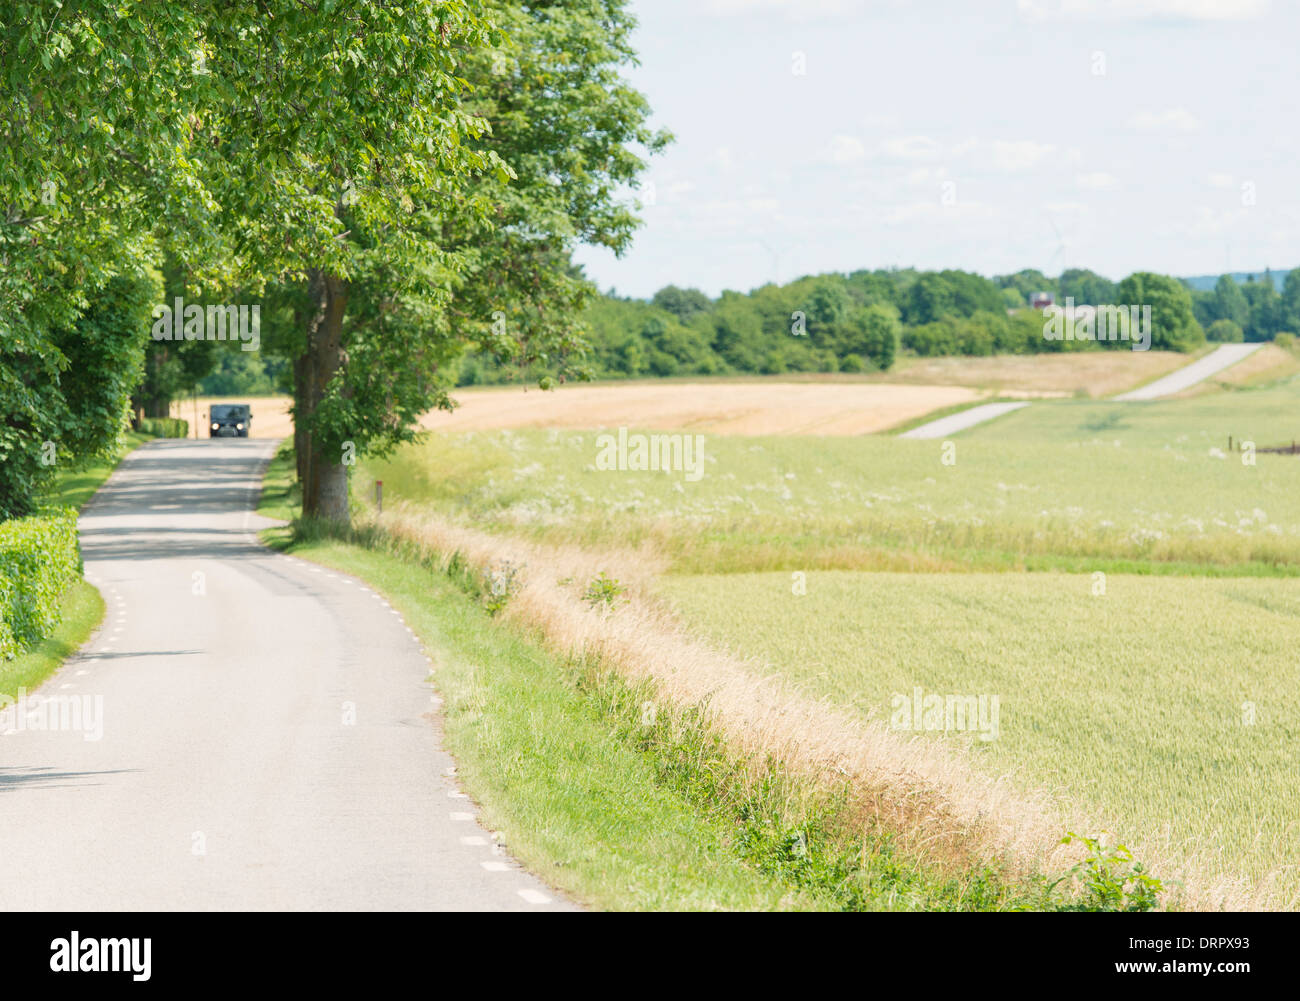 Countryside road running through beautiful landscape with distant car driving in tranquil rural setting, Sweden Stock Photo